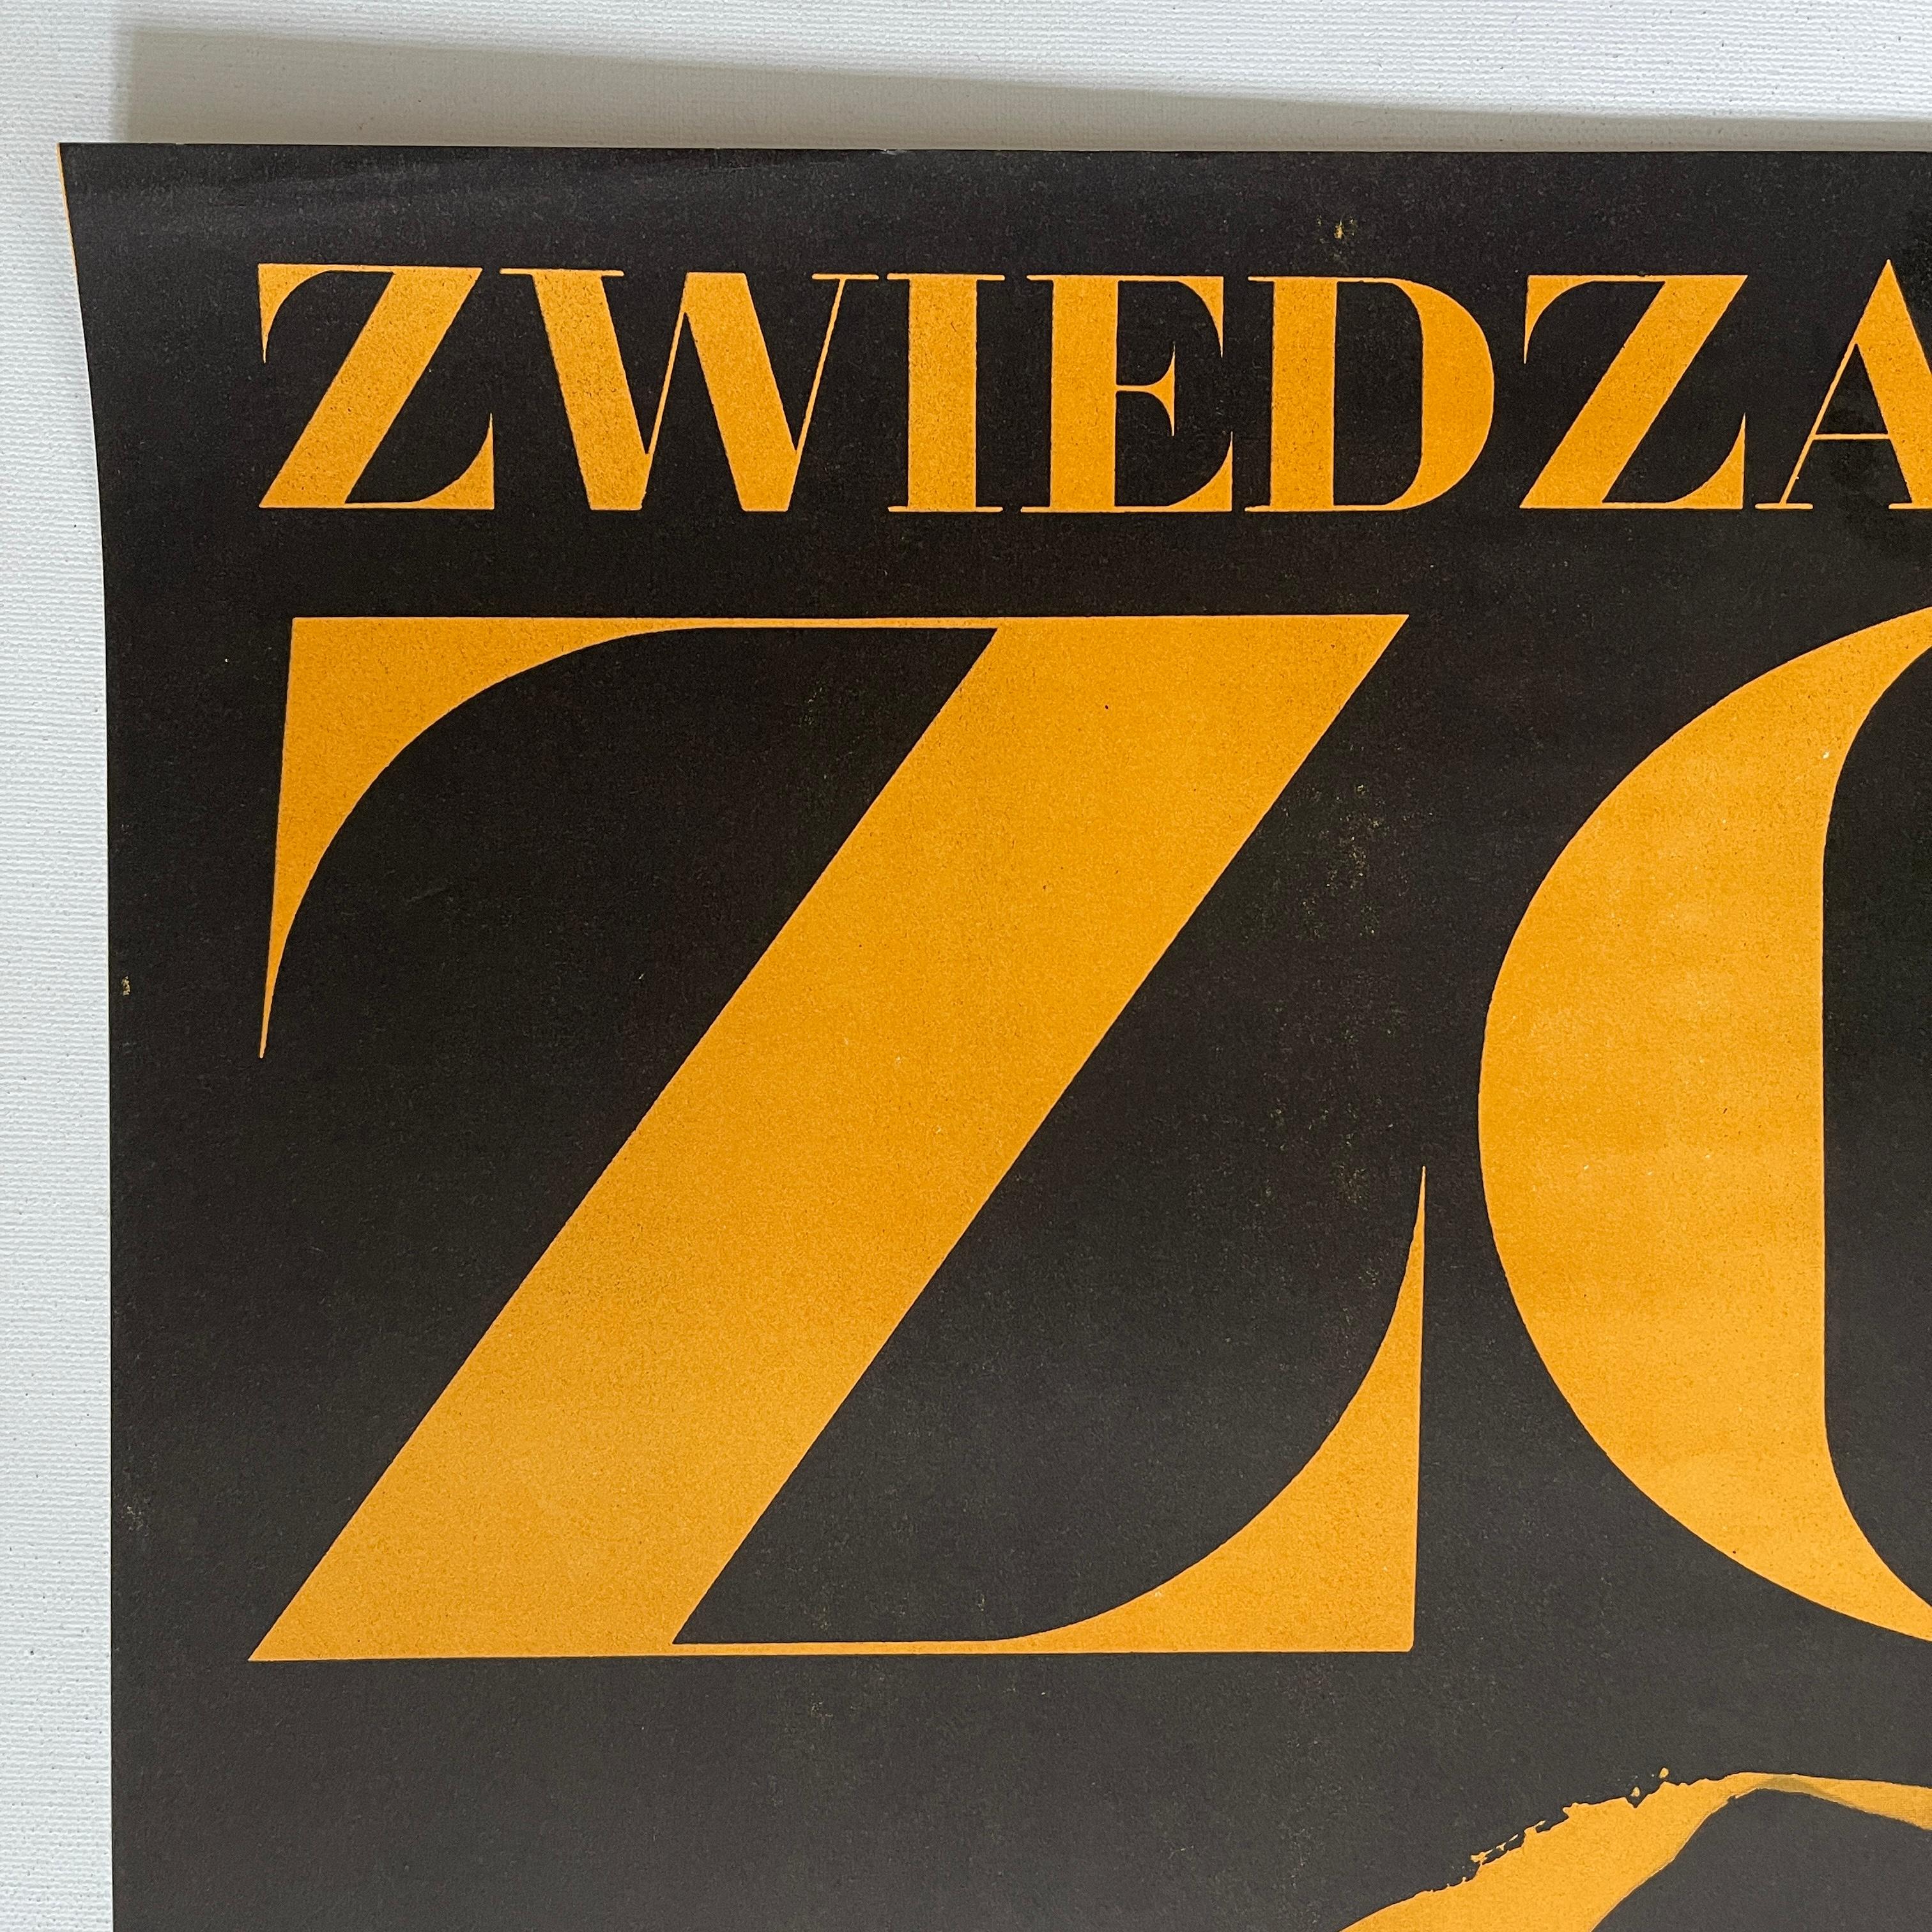 Mid-20th Century Zoo Tiger, Vintage Polish Advertising Poster by Waldemar Swierzy, 1967 For Sale